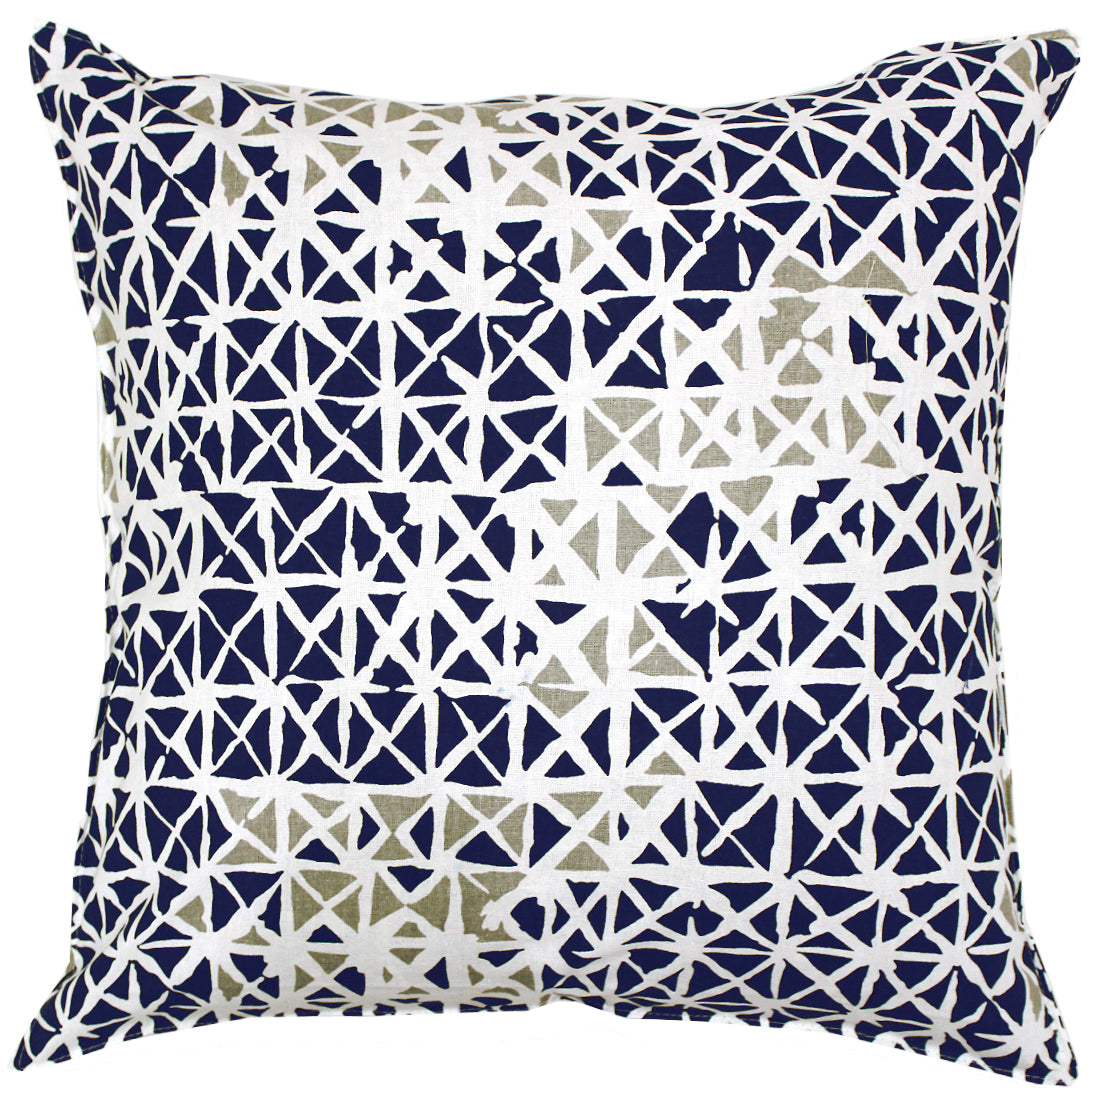 Soft Geometrical print Blue & Grey Cotton Cushion Cover Set online in India